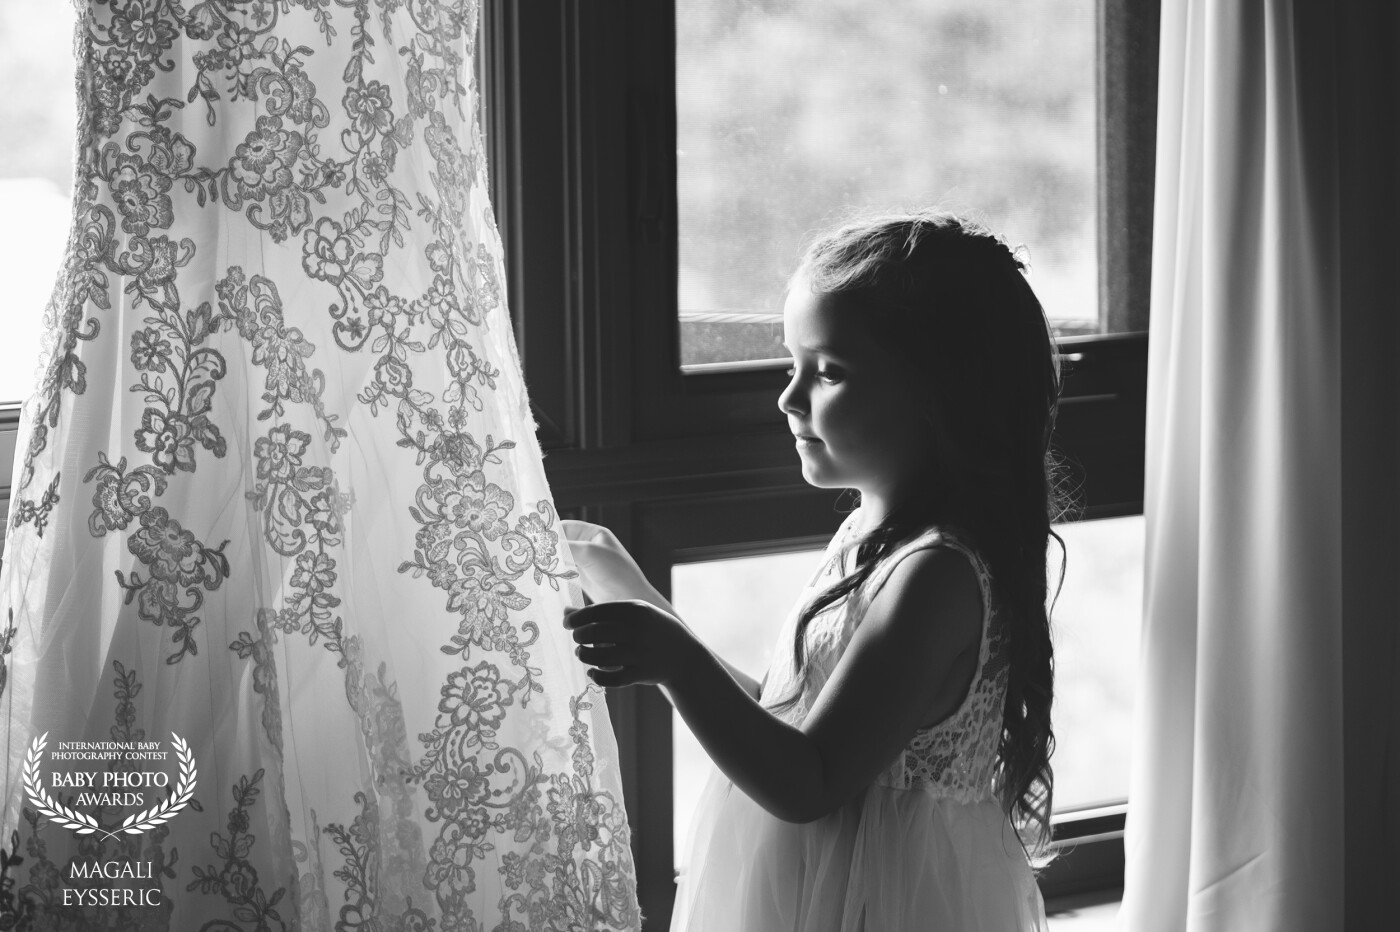 I fell in love when I took this photo at a wedding. I seem to have seen the dream of a little girl in her eyes to say that one day I will be this princess too